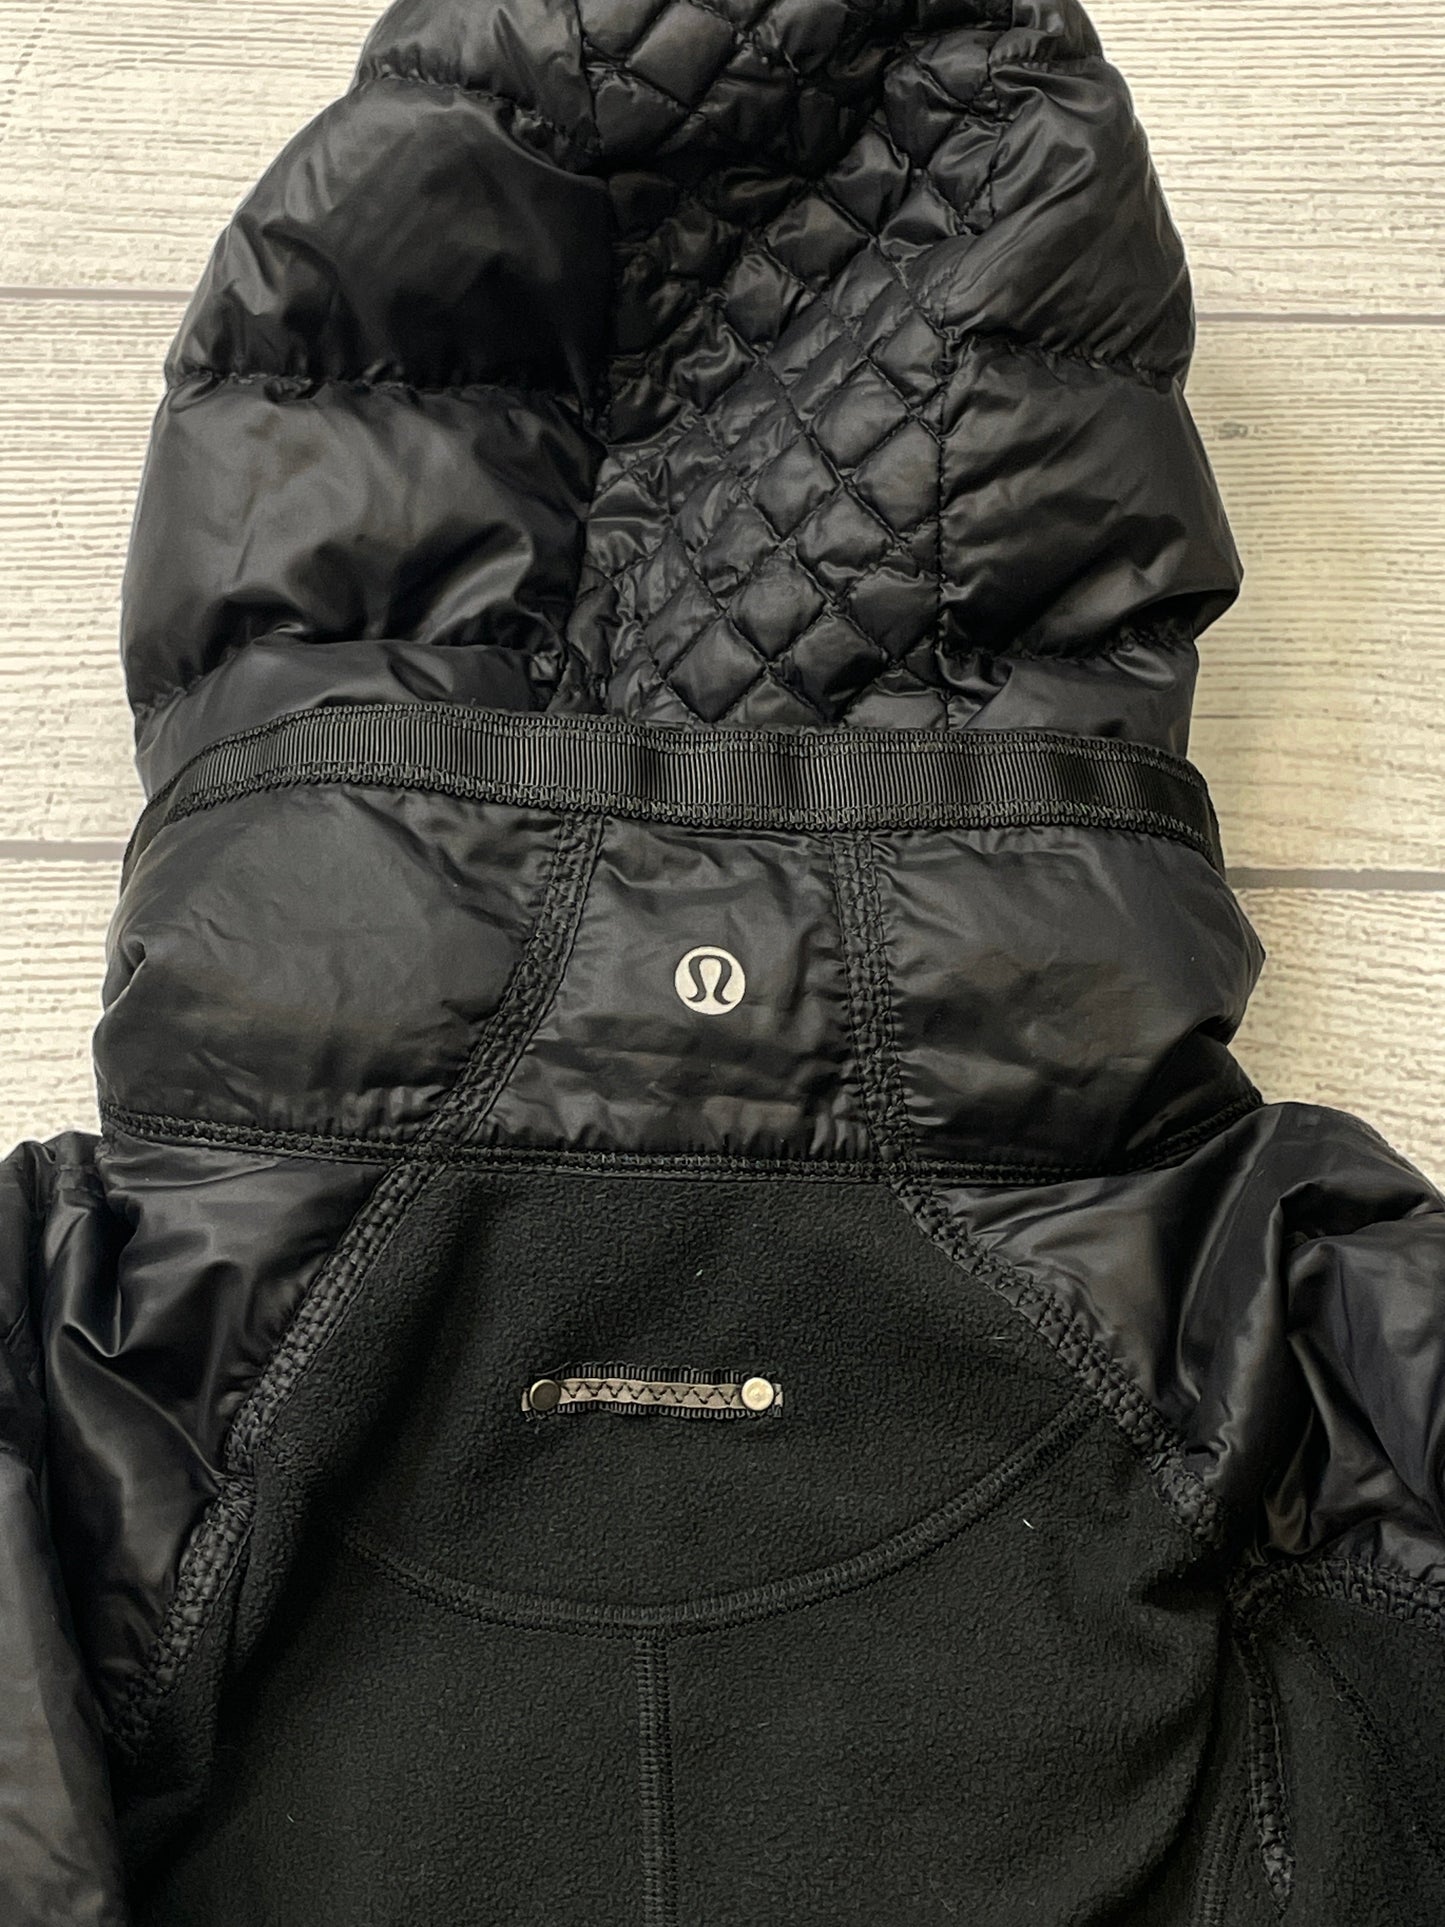 Black Coat Puffer & Quilted Lululemon, Size 4